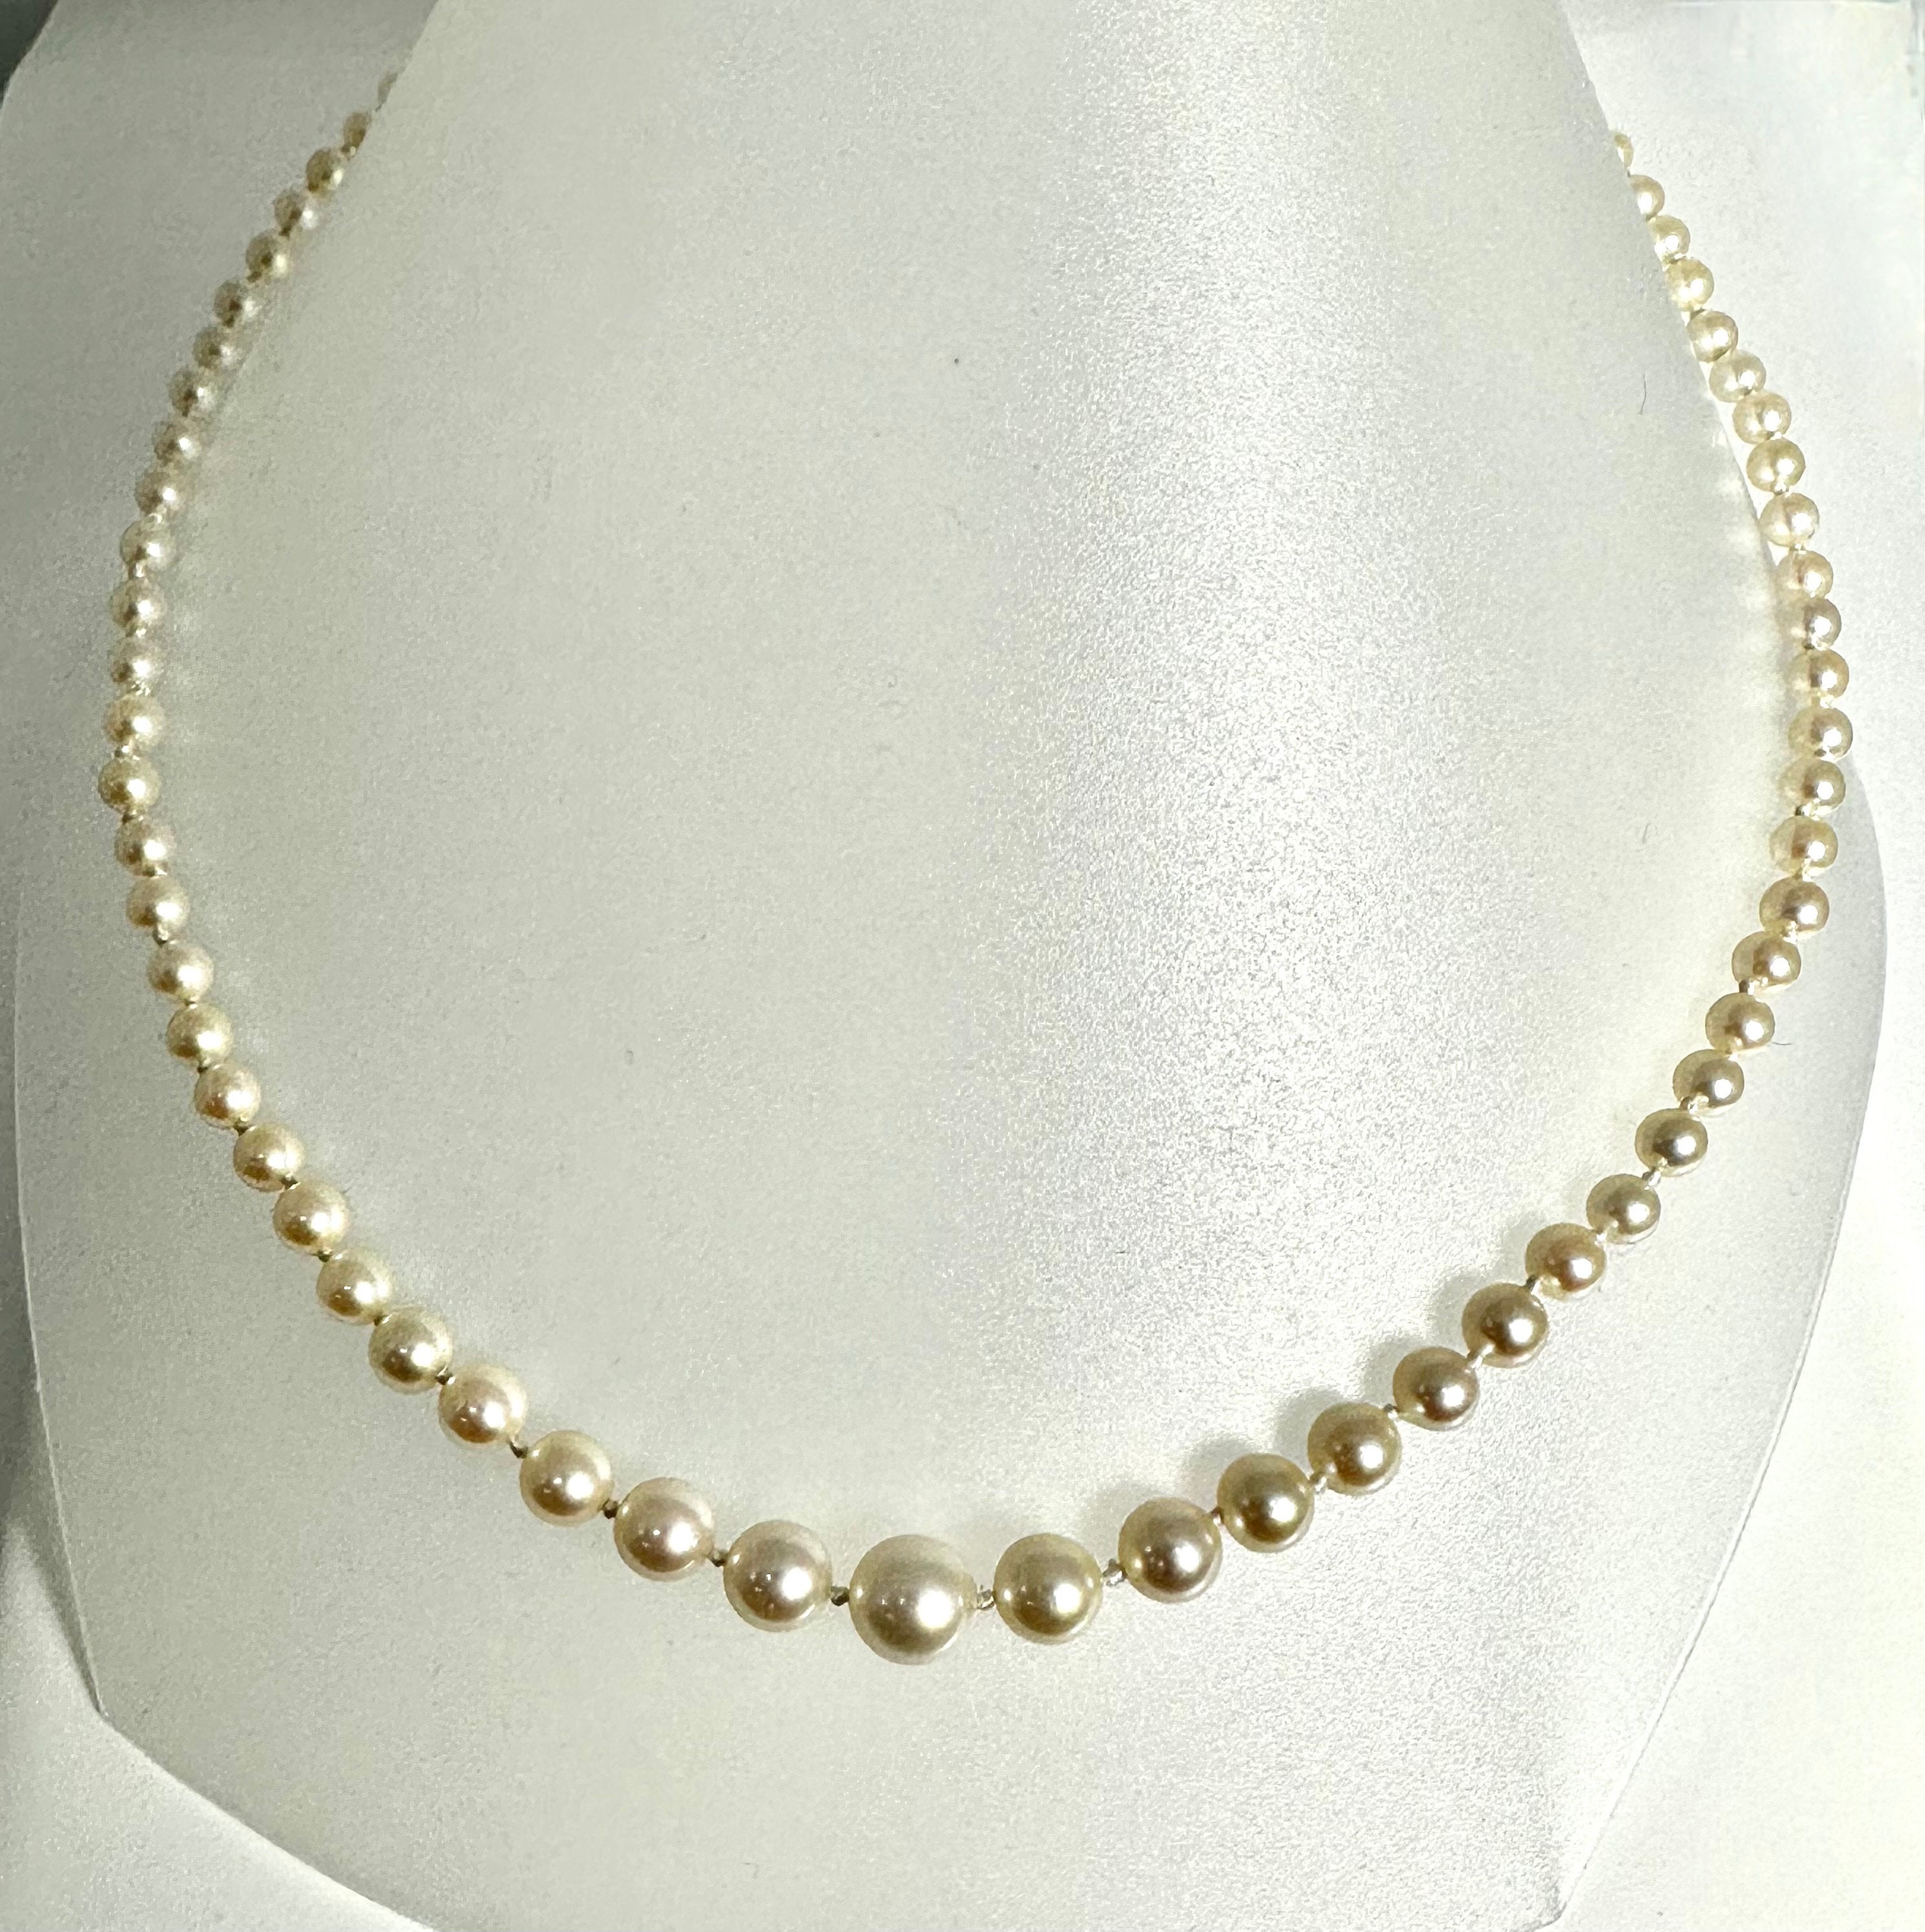 Vintage Graduated Cultured Pearl Necklace with 14 Karat White Gold Filigree  Clasp Accented with Two Round Diamonds